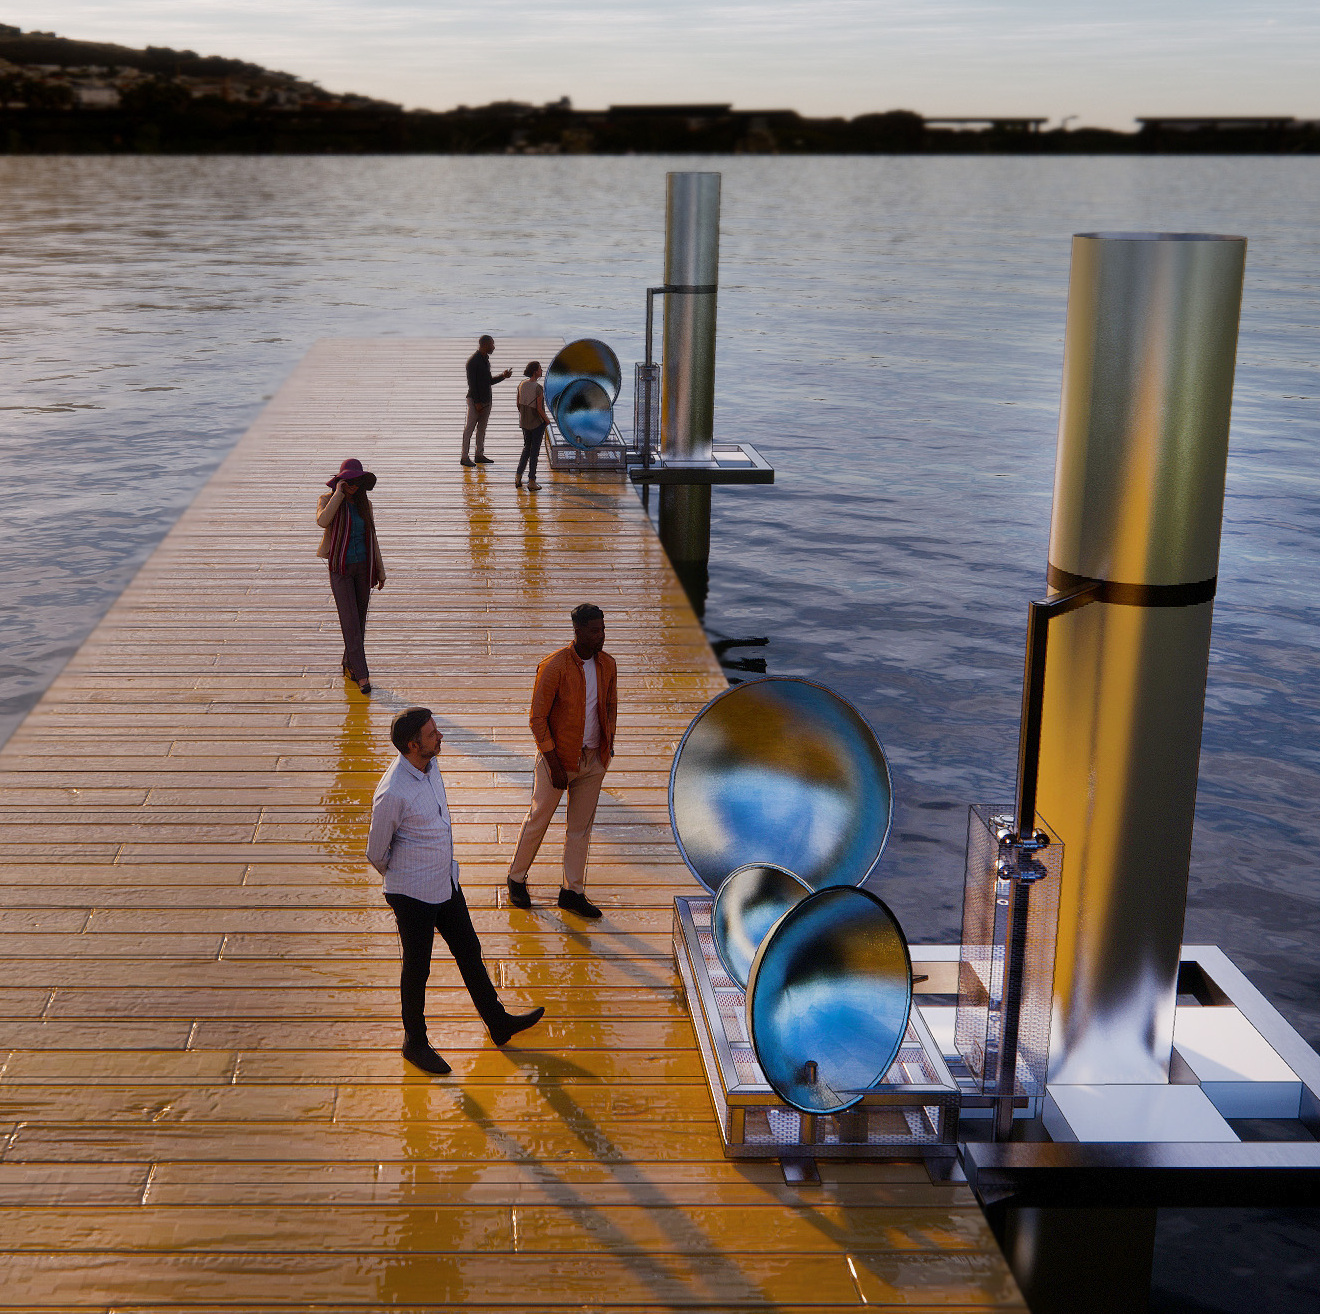 Rendering of a floating dock that includes an art installation where metal half-sphere shapes are mounted vertically on a structure attached to the foundations of a dock.